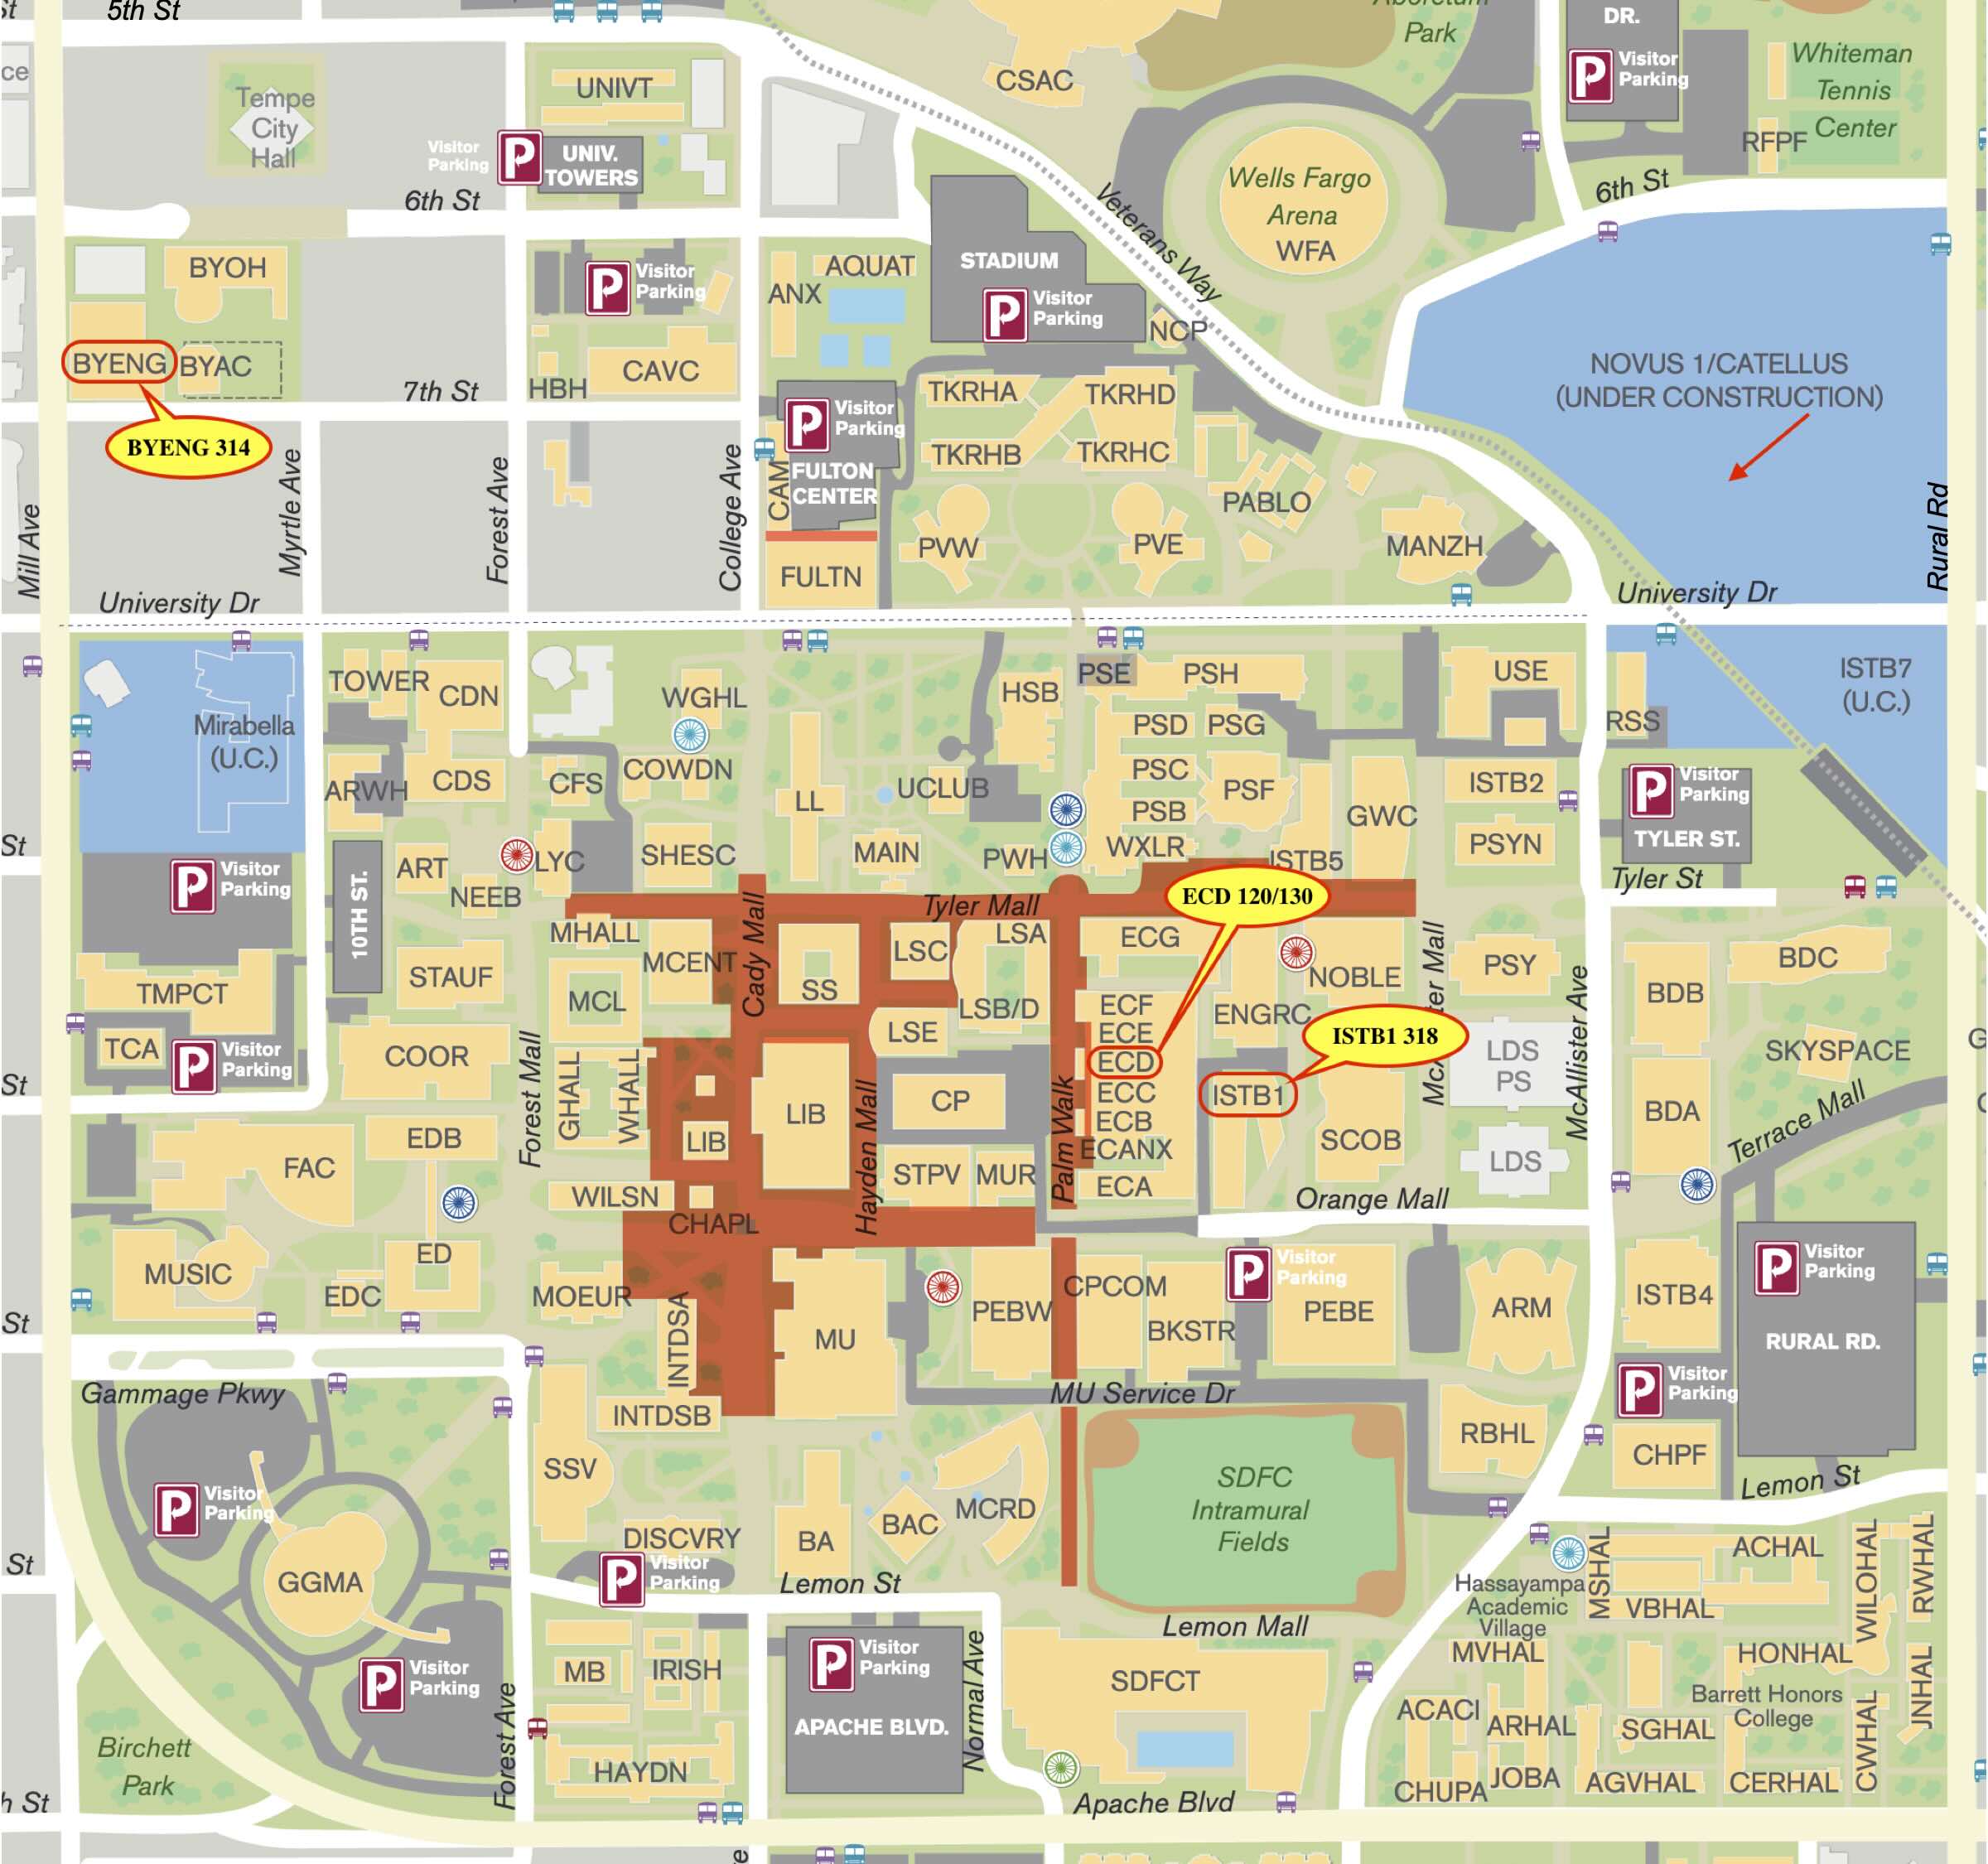 Map of ASU campus with BYENG, ECD, and ISTB1 buildings pointed out. Underlying map via Arizona State University.